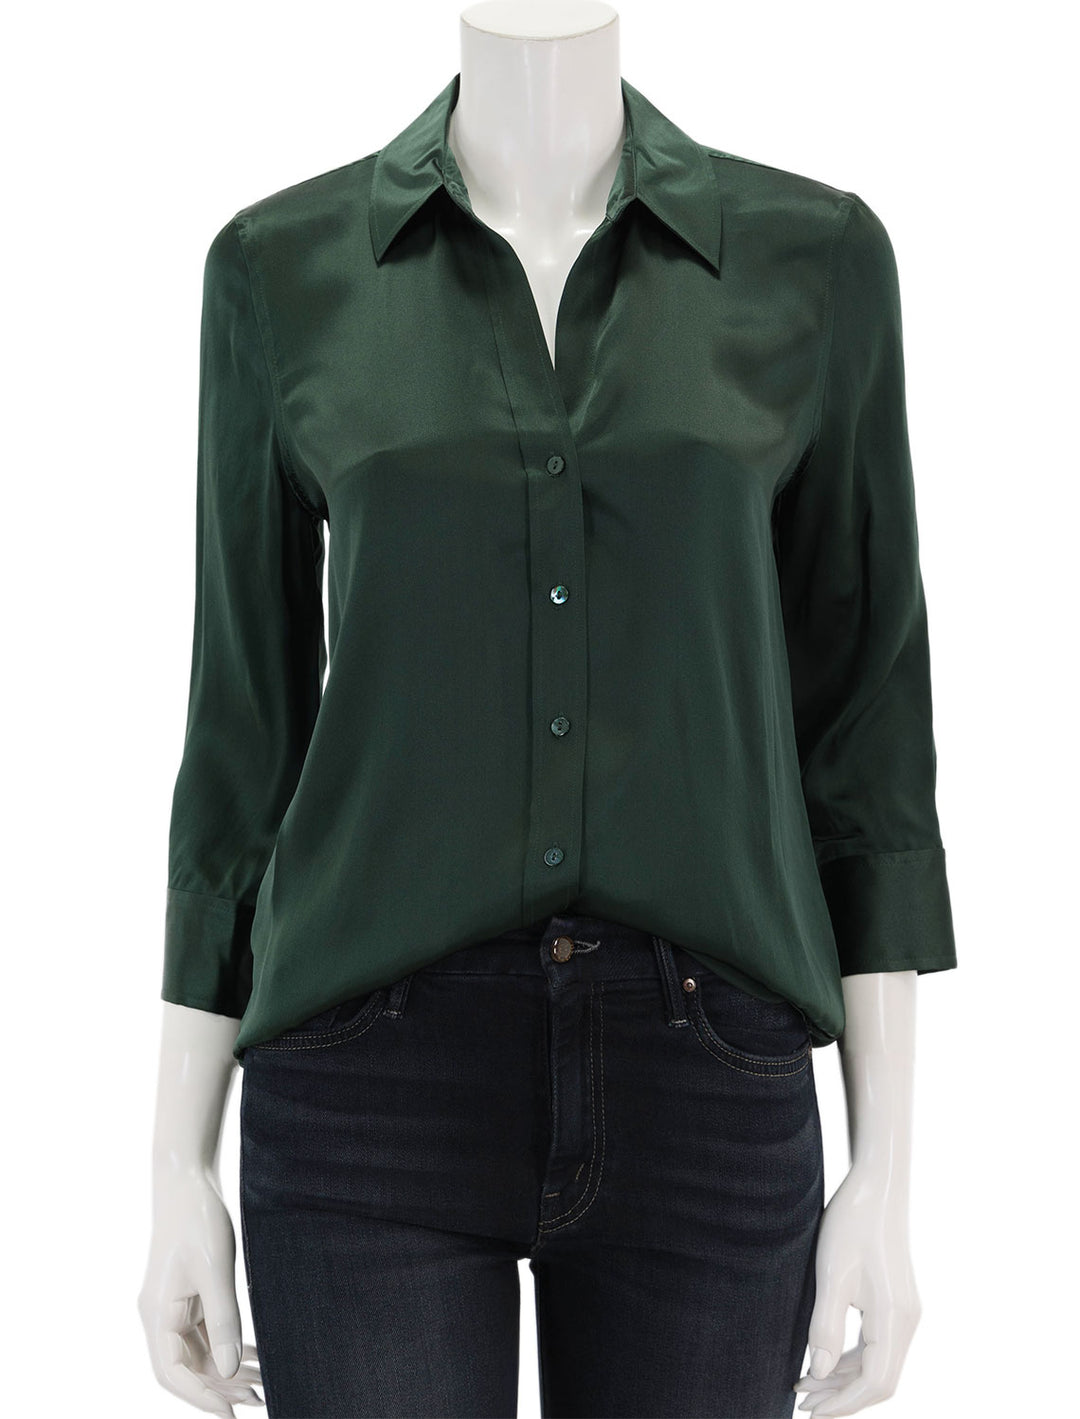 Front view of L'agence's dani in forest green.